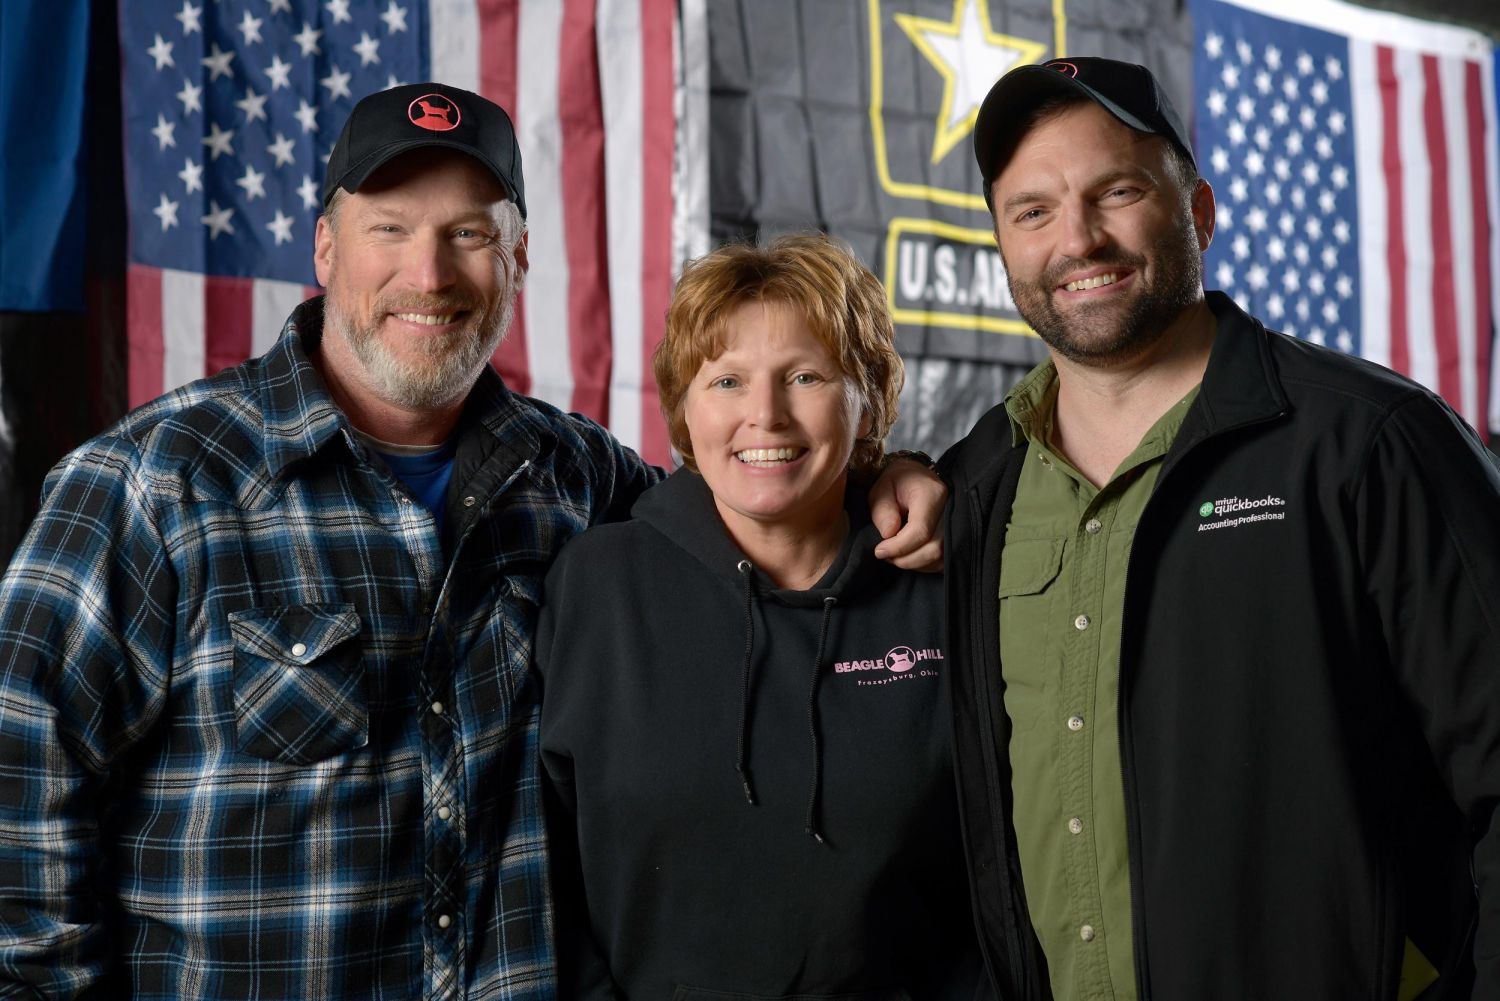 Brenda with Jake Clark and Patrick Atkinson of Save a Warrior